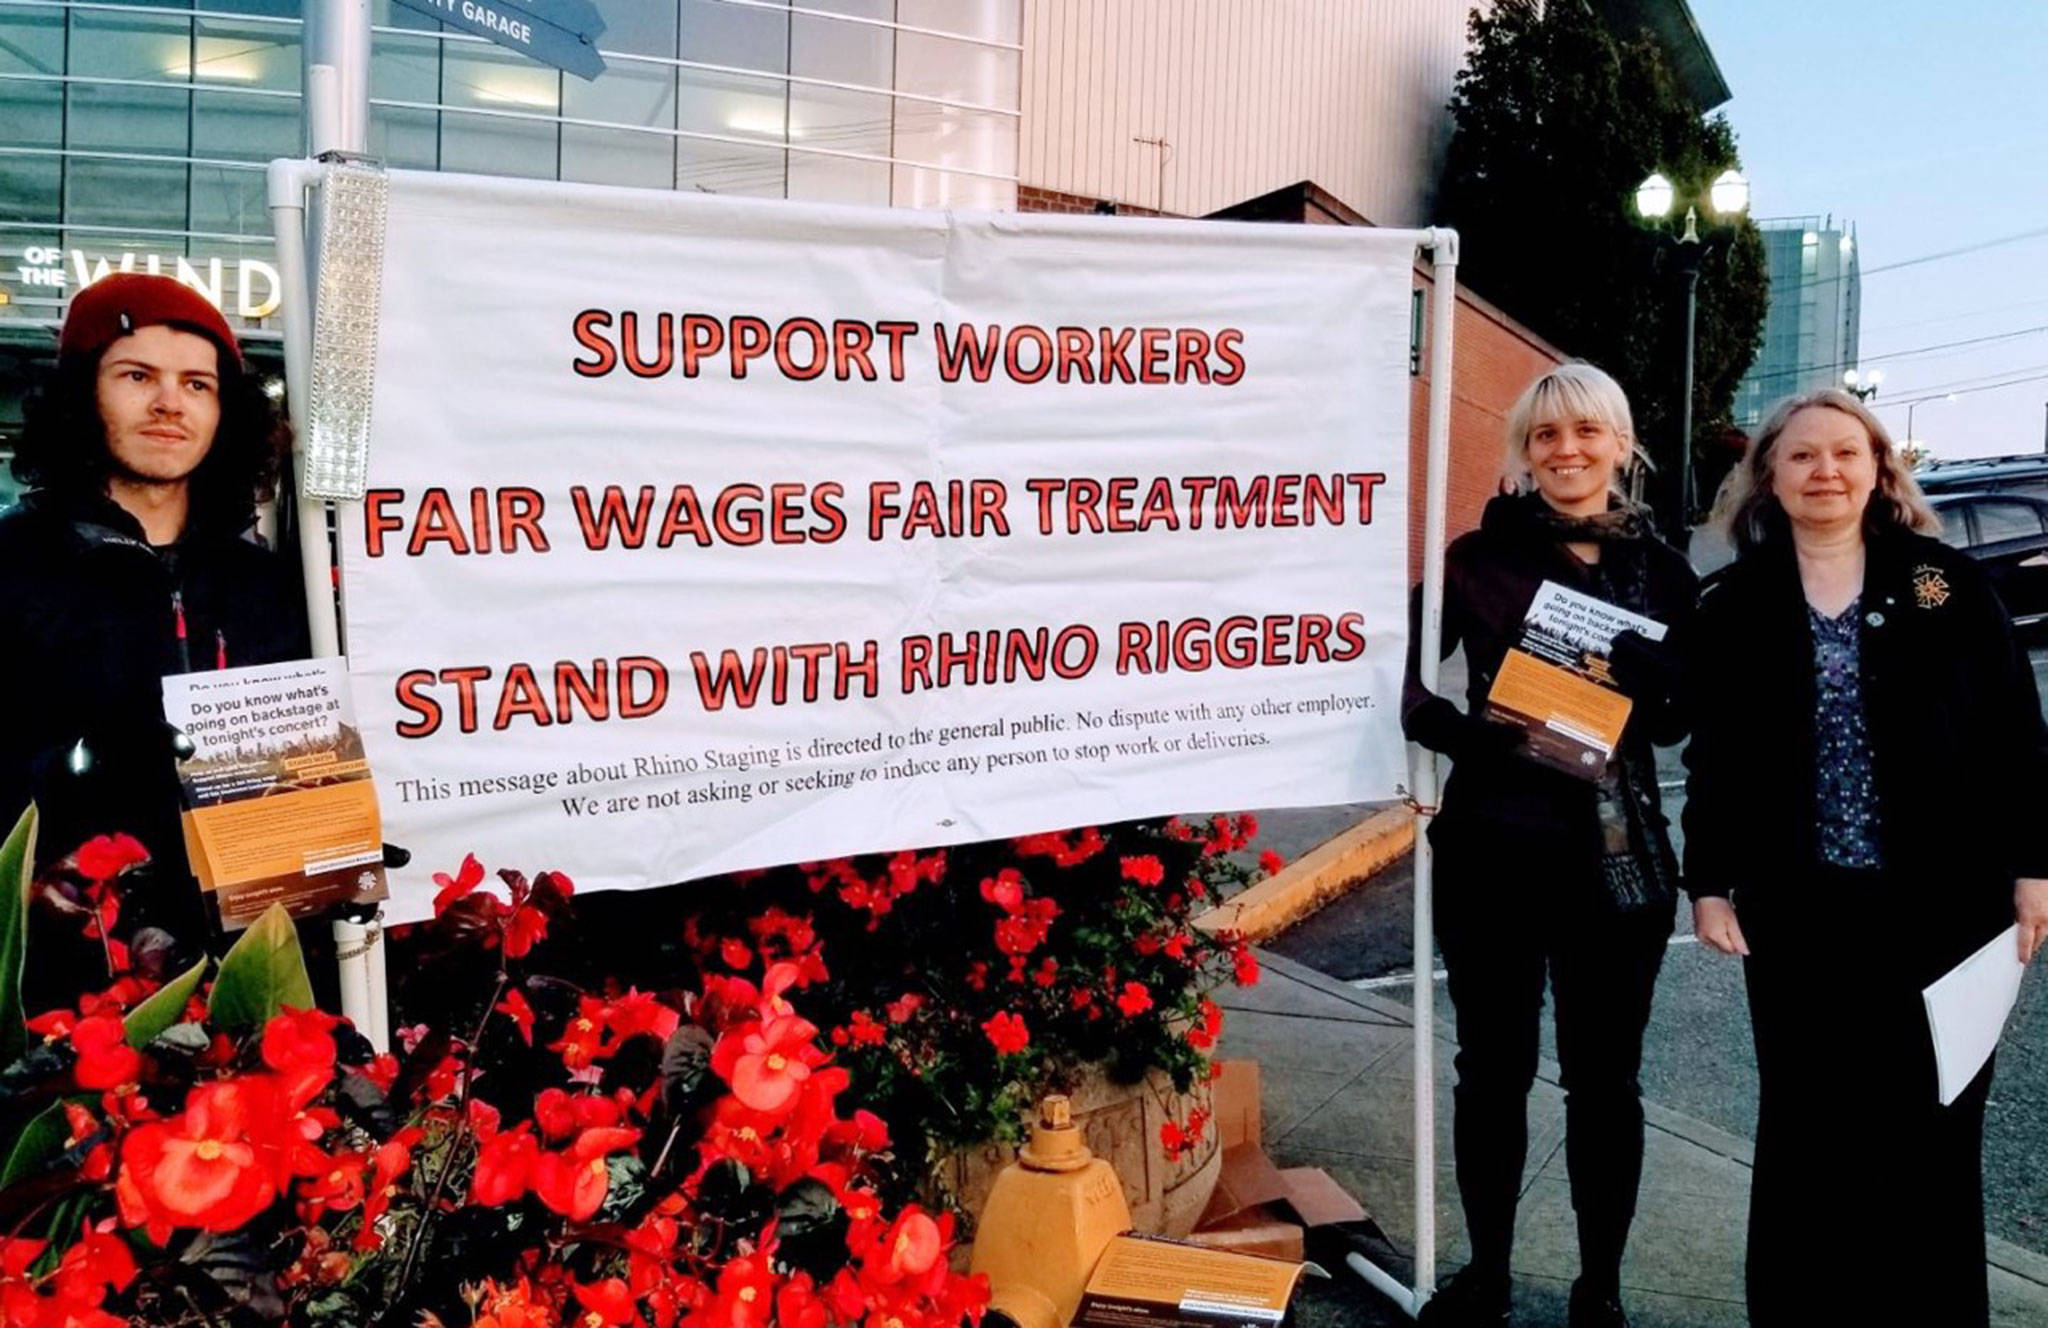 Members Julian Amrine (from left), Ellie Fog and Jennifer Bacon of the International Association of Theatrical and Stage Employees held pickets outside Angel of the Winds Arena in downtown Everett this fall. (International Association of Theatrical and Stage Employees)